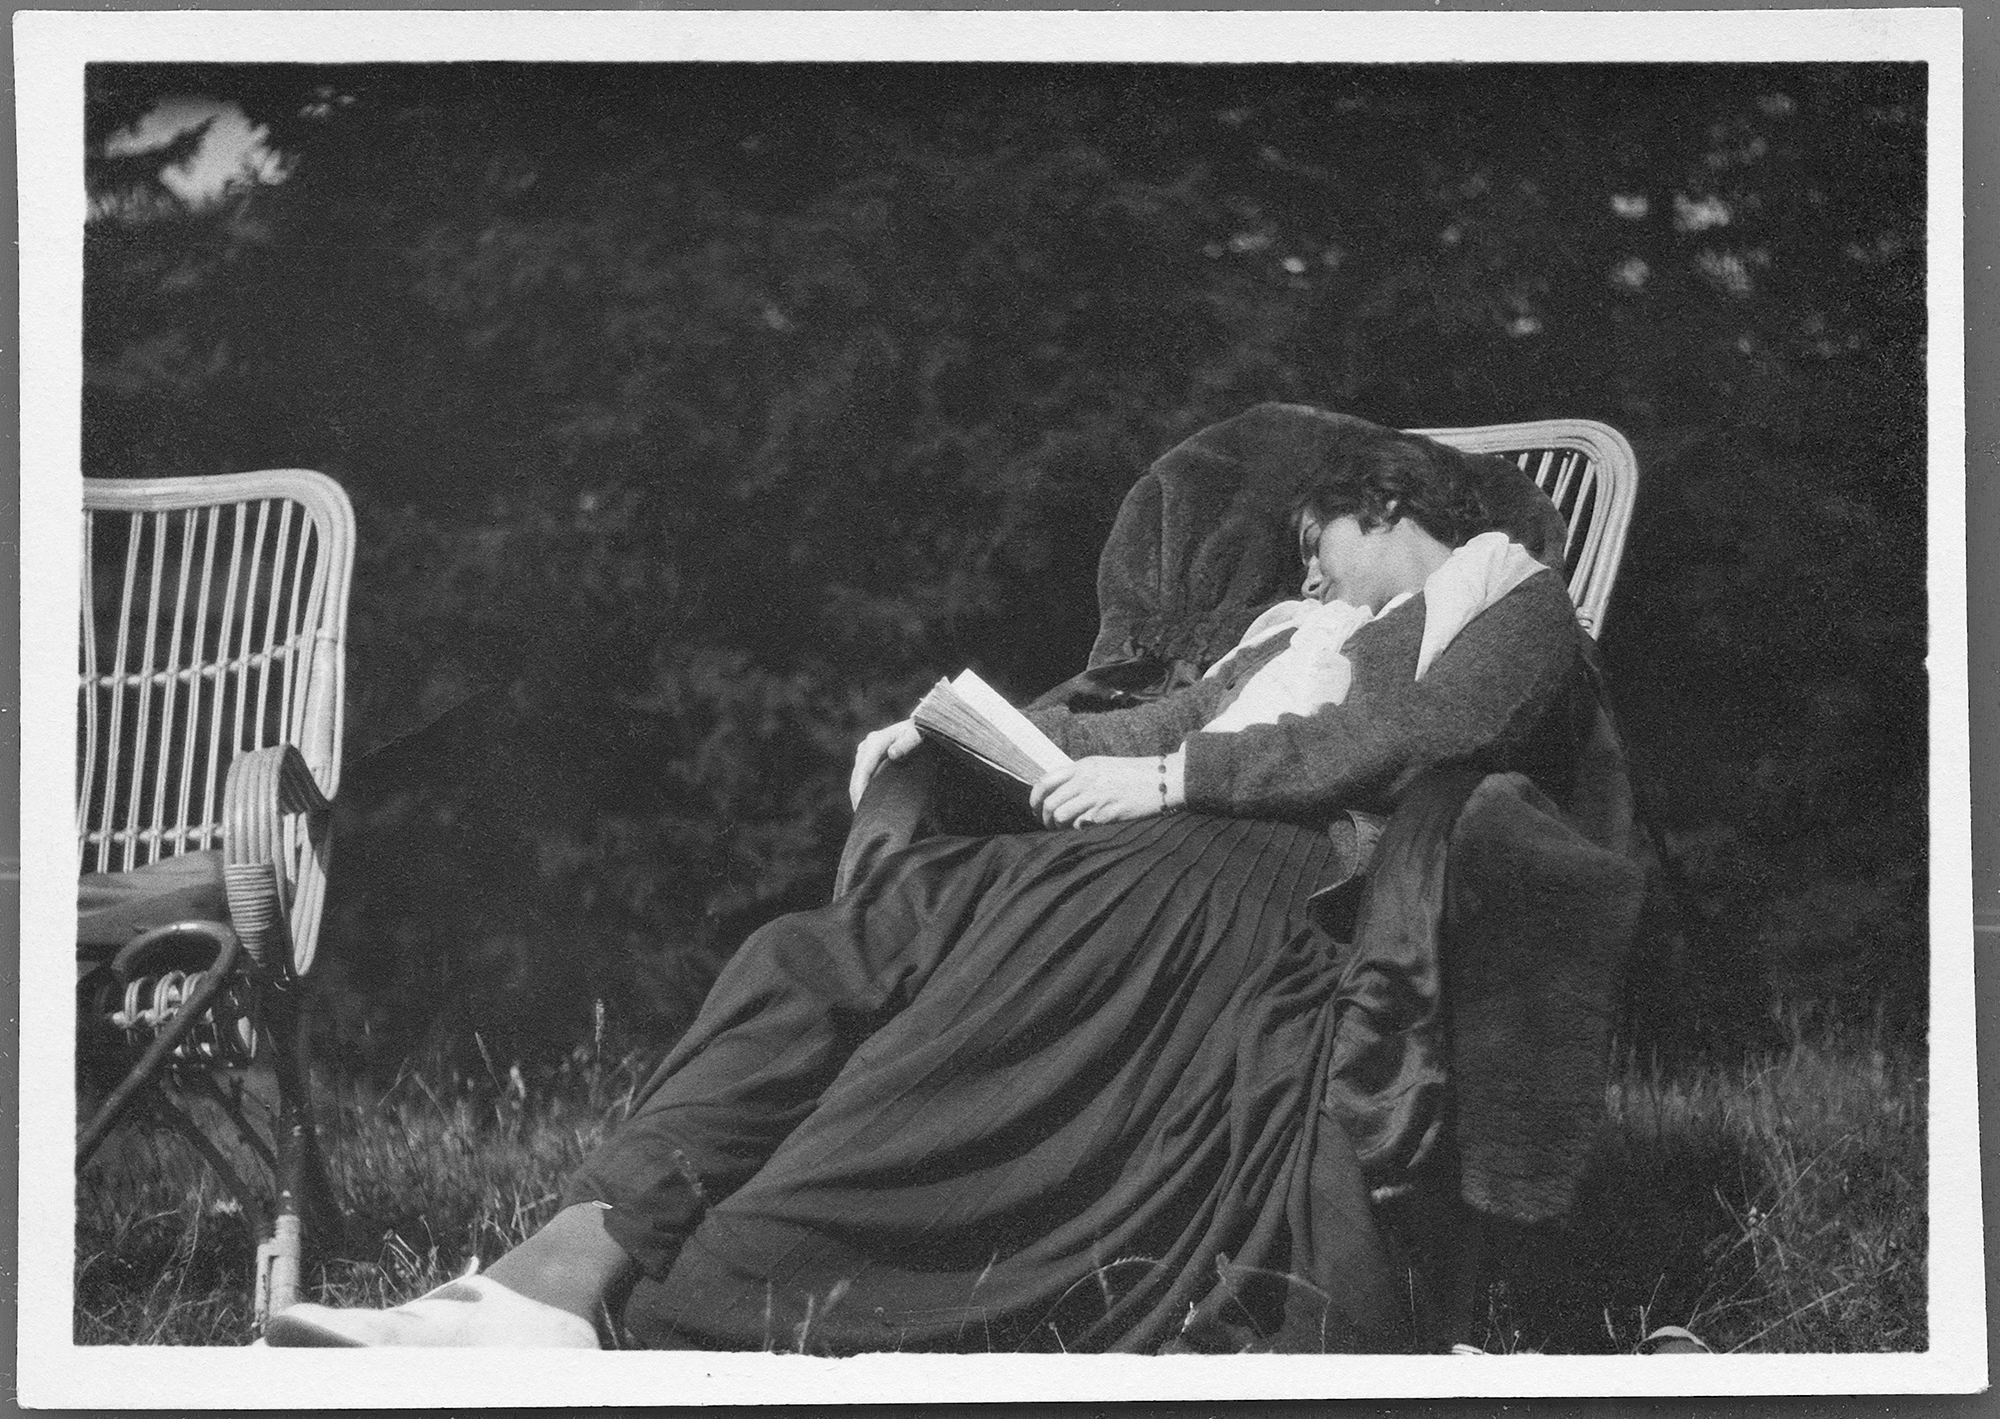 cc_venice_anonymous_gabrielle-chanel-asleep-with-a-book-in-her-hand